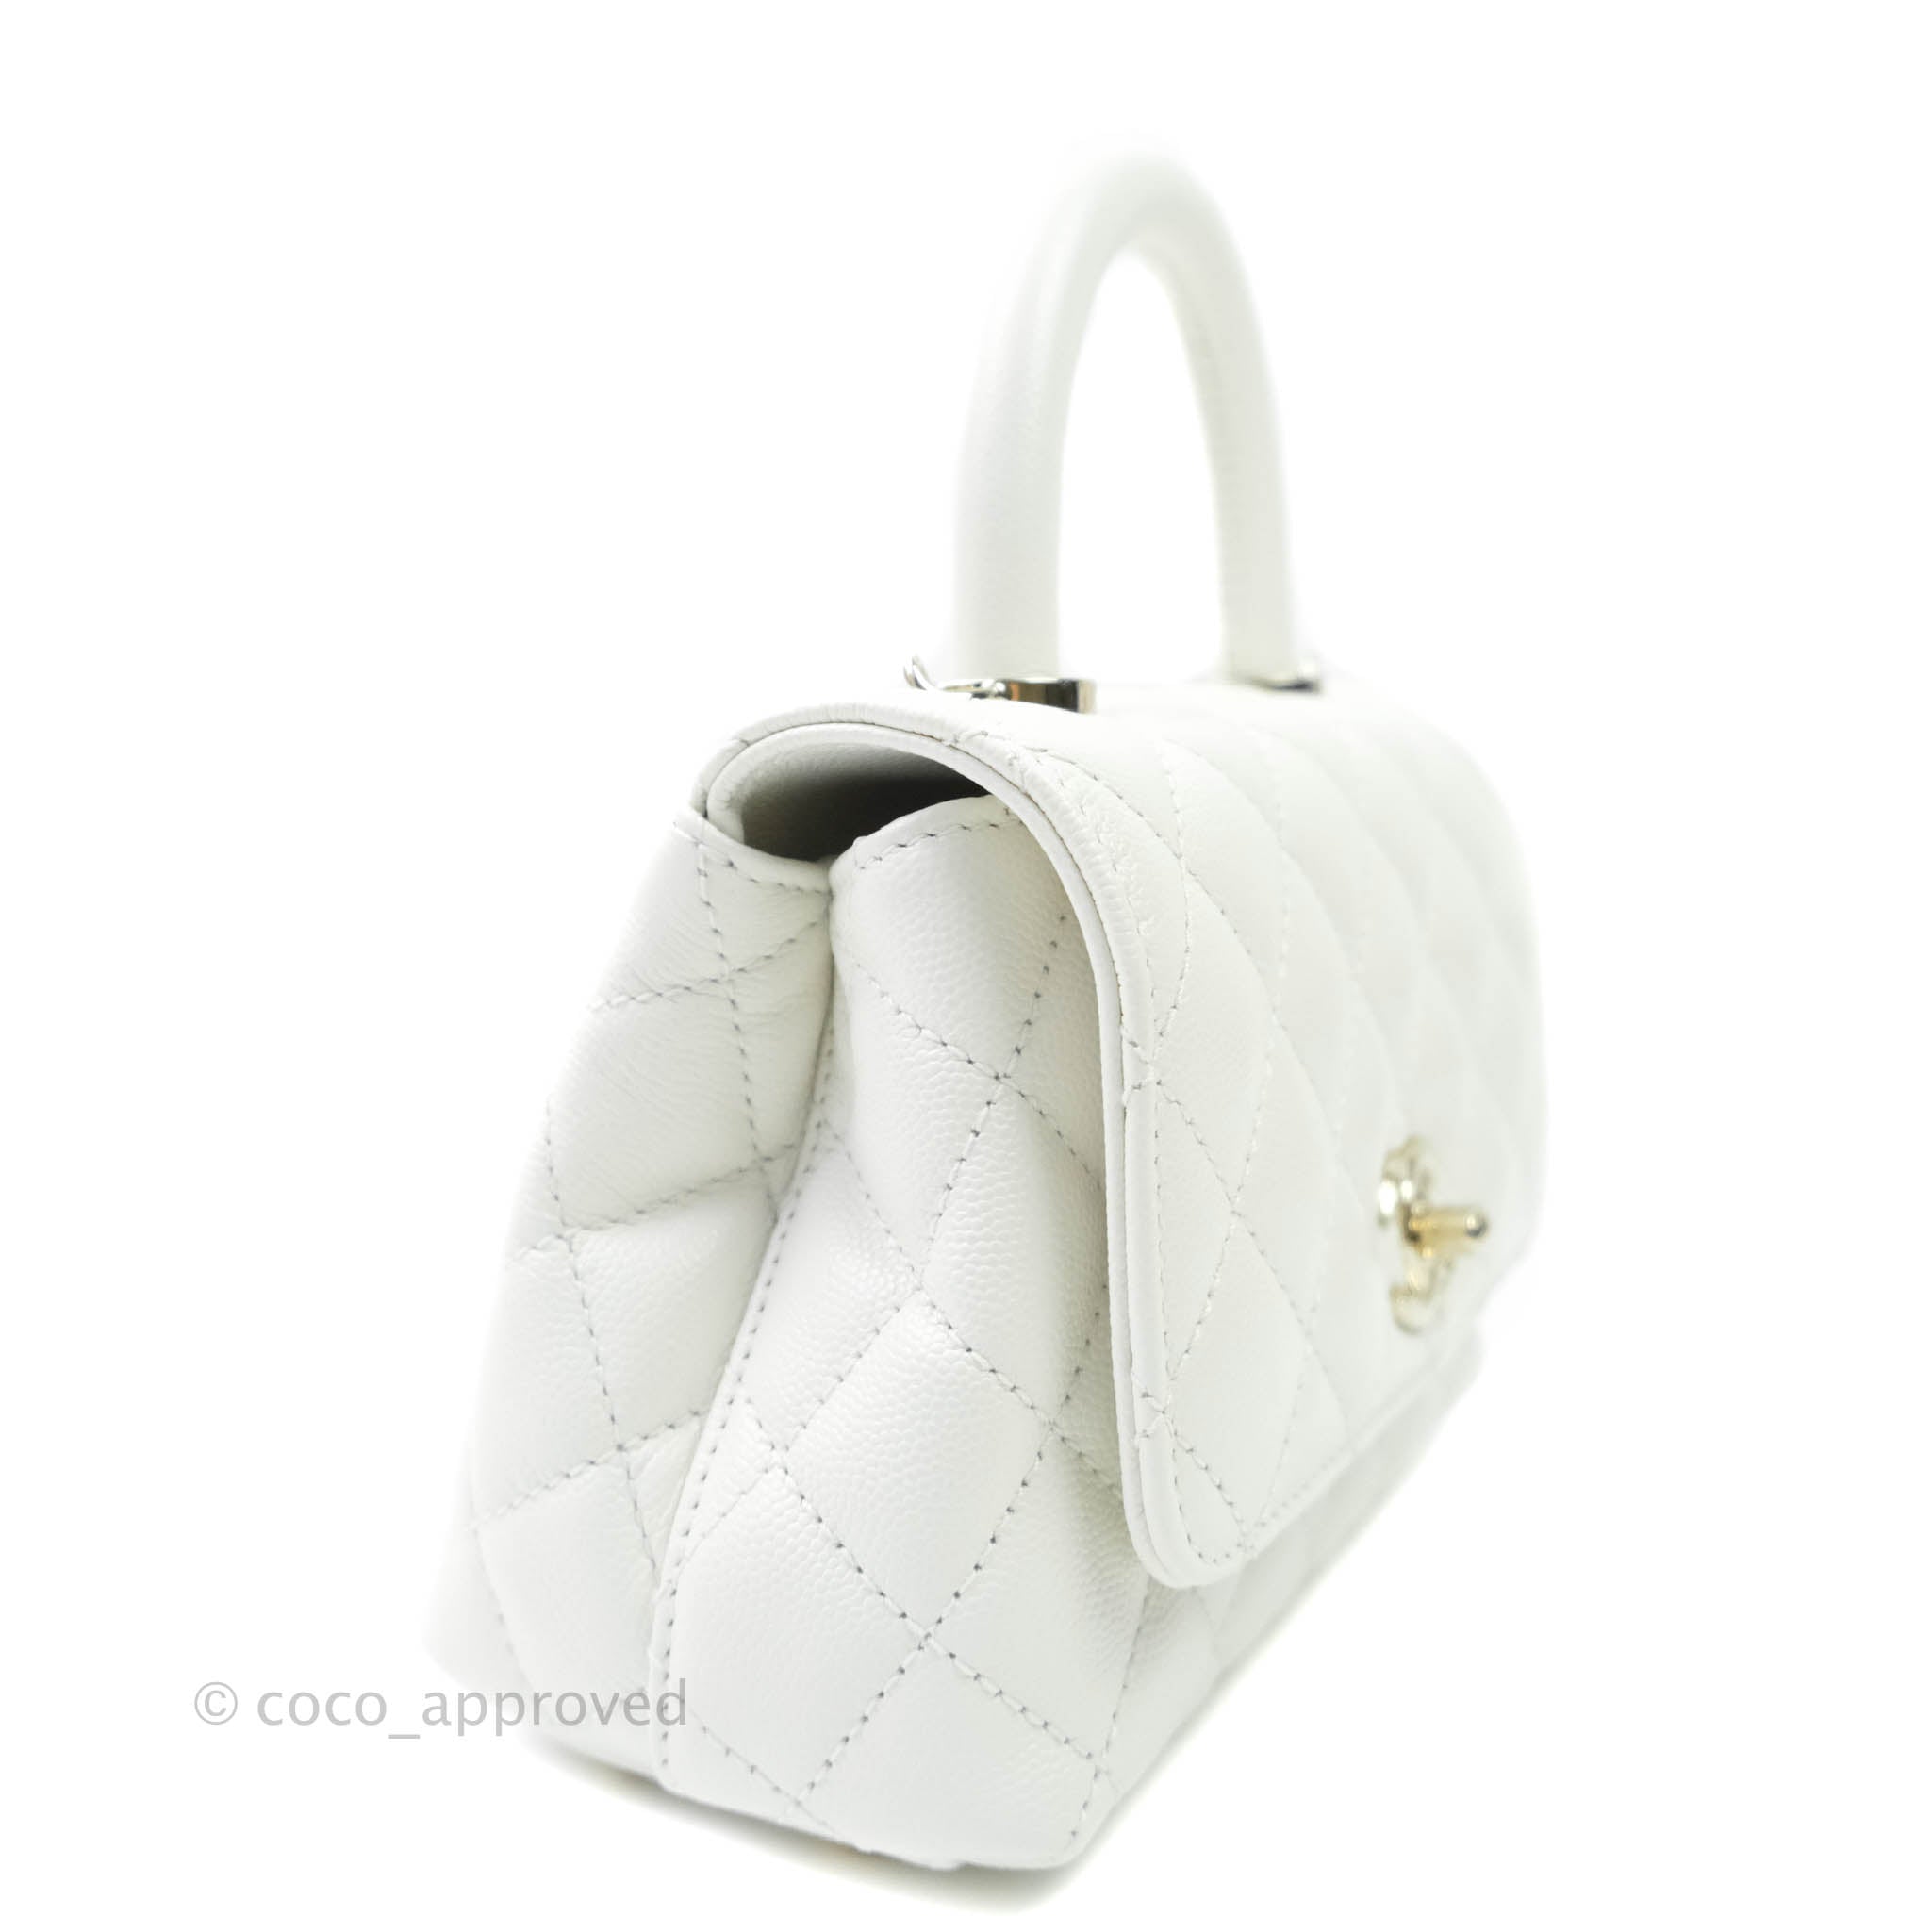 CHANEL Caviar Quilted Small Coco Handle Flap White 1286833